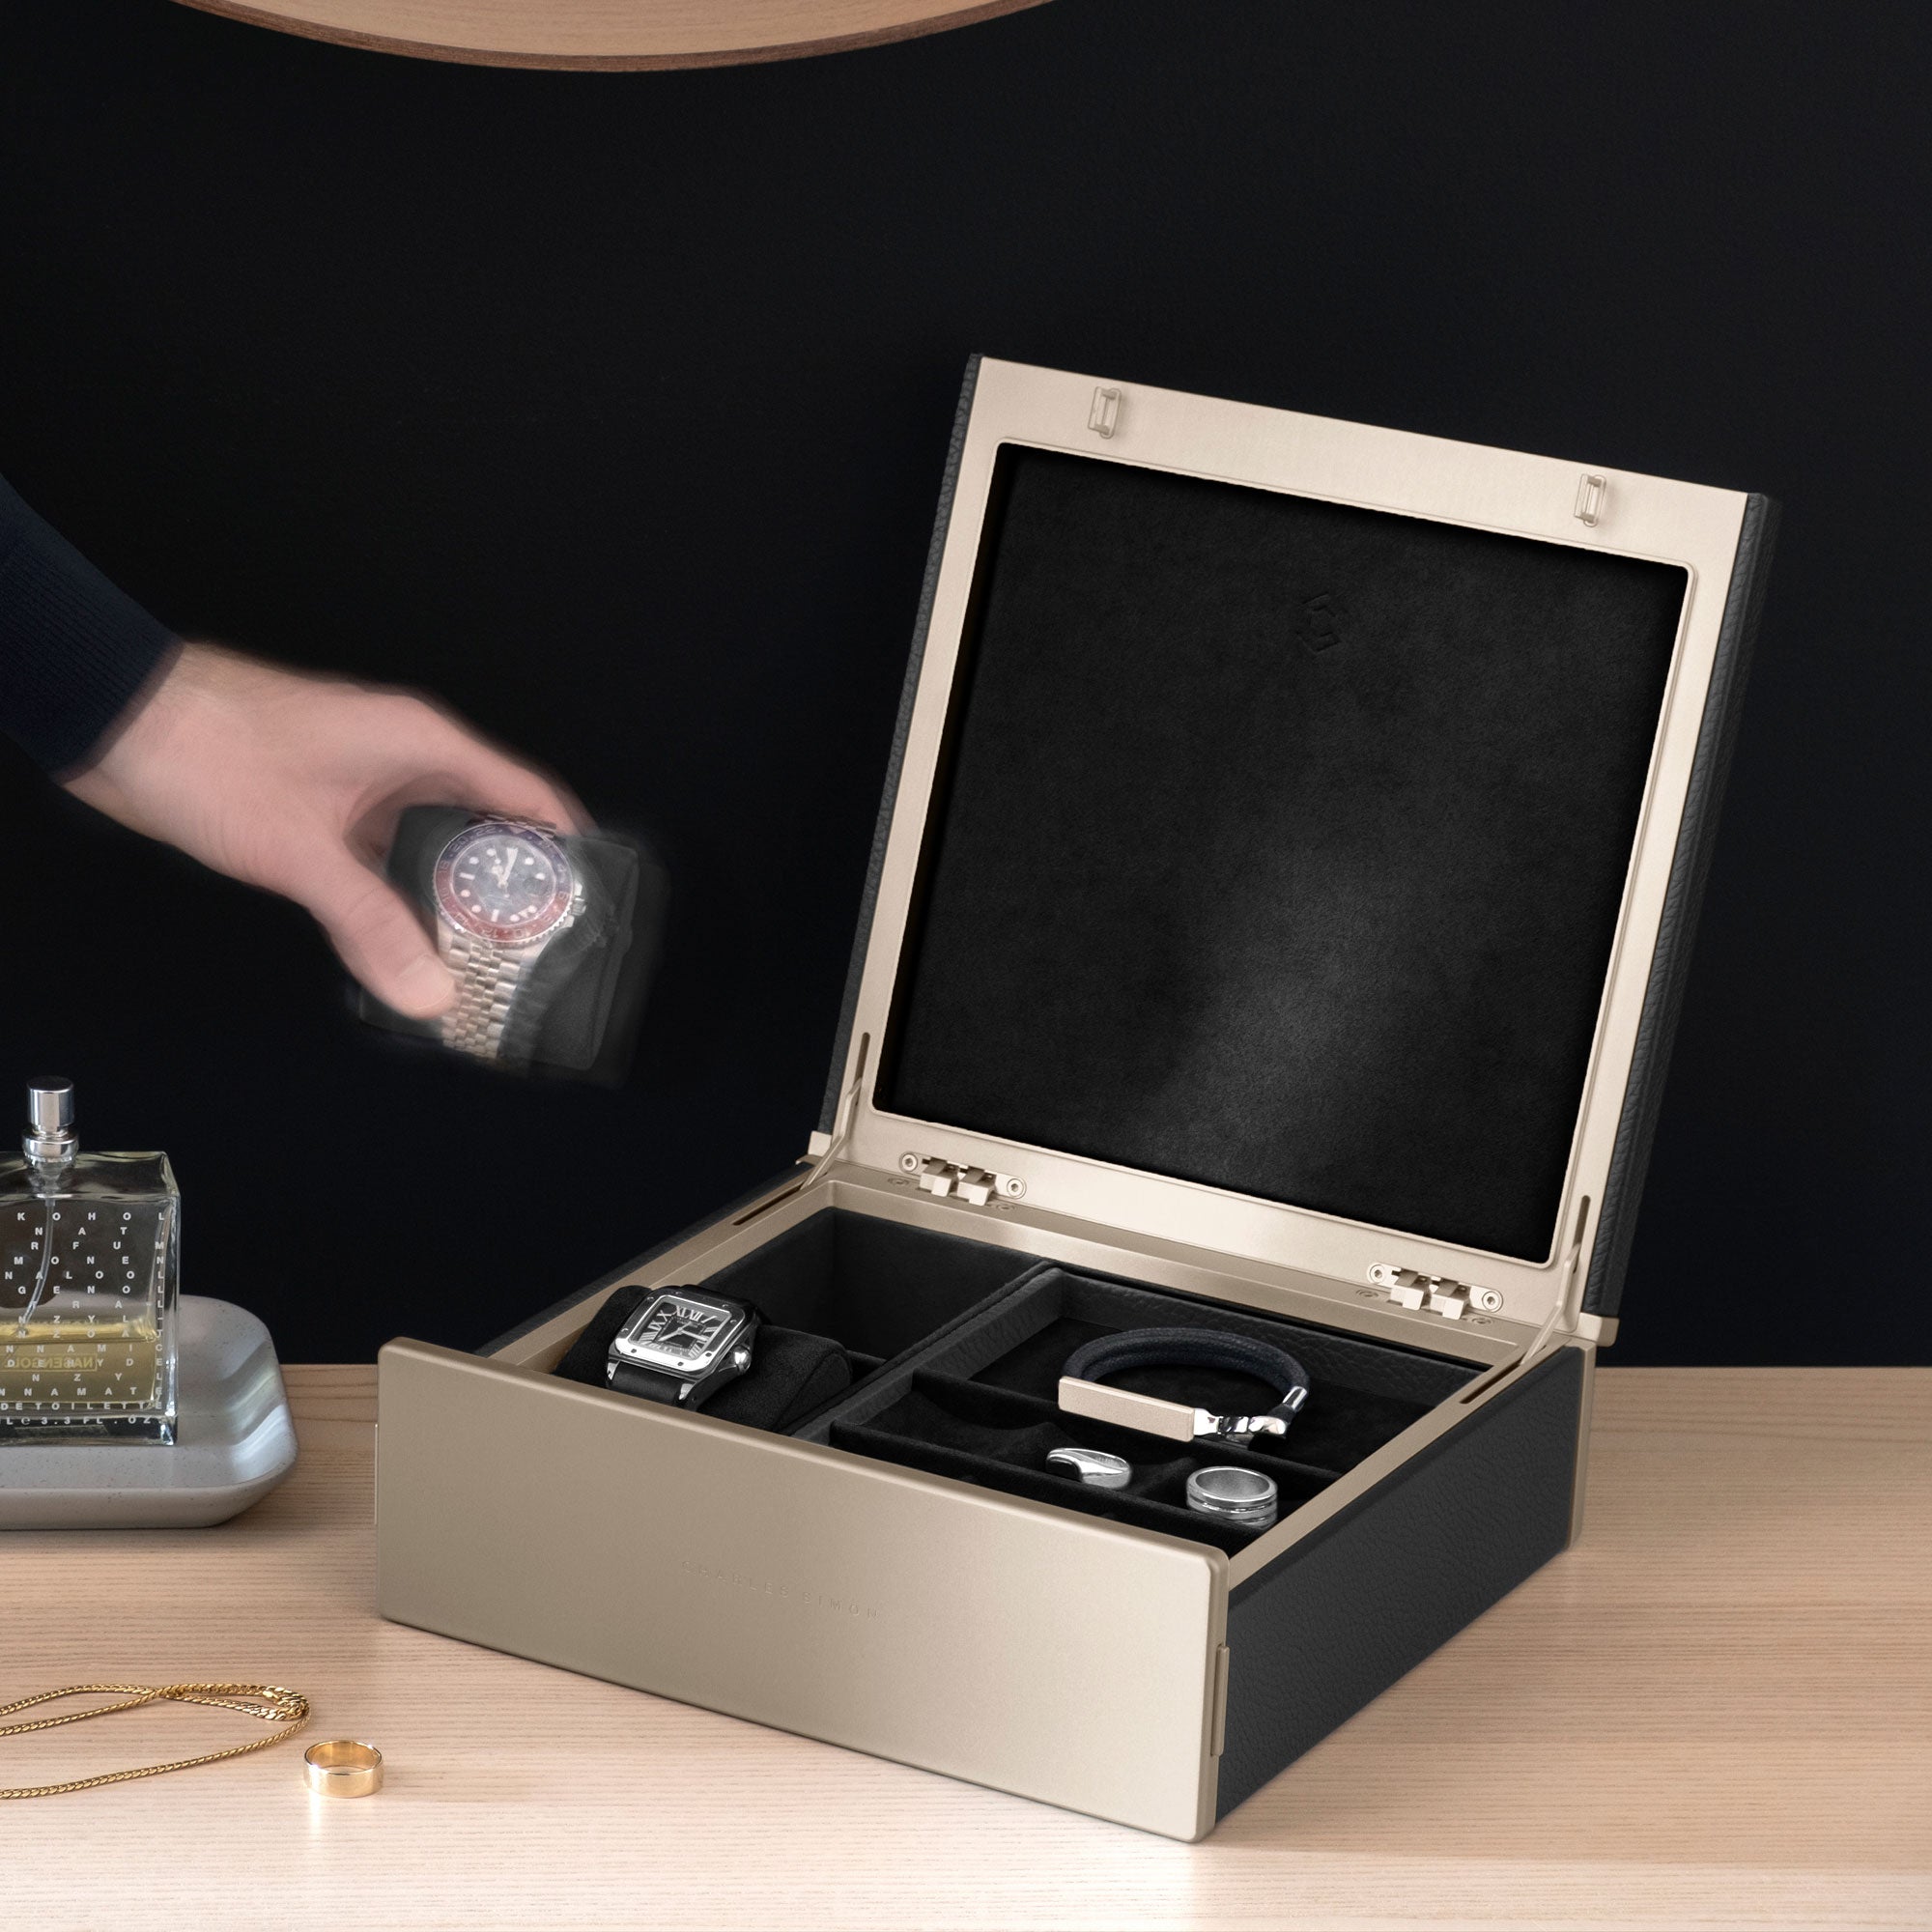 Lifestyle photo of black Taylor 2 gold watch and jewelry box for an entire collection of watches and jewelry.